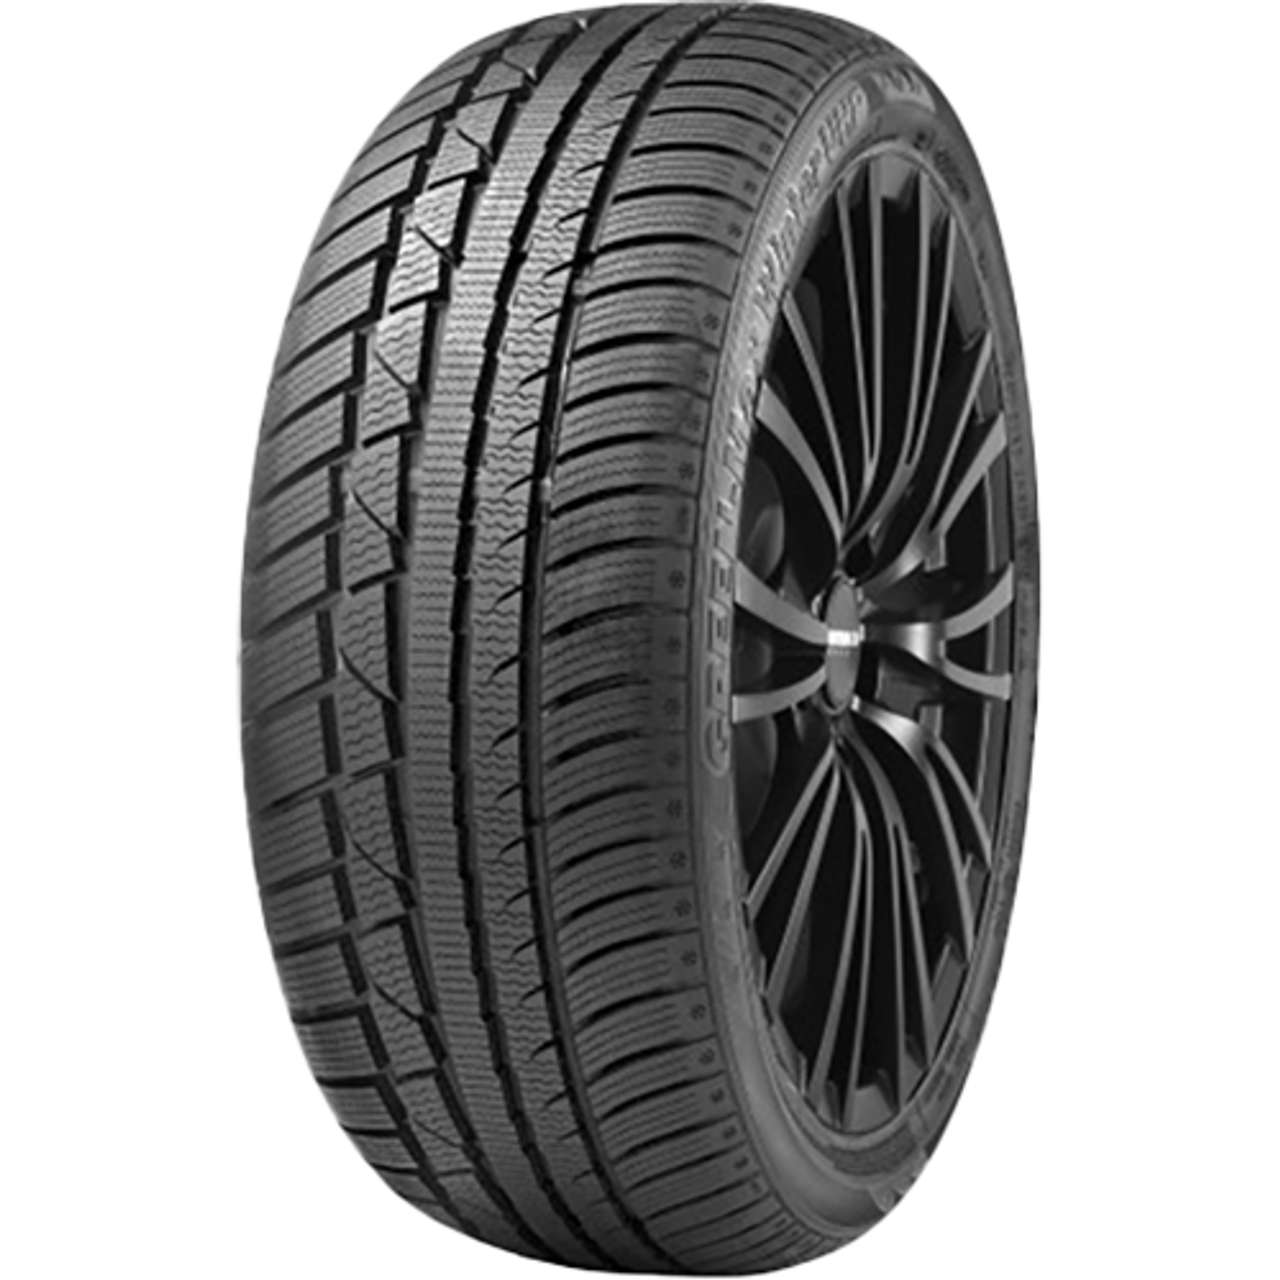 LINGLONG GREEN-MAX WINTER UHP 225/45R18 95H MFS BSW